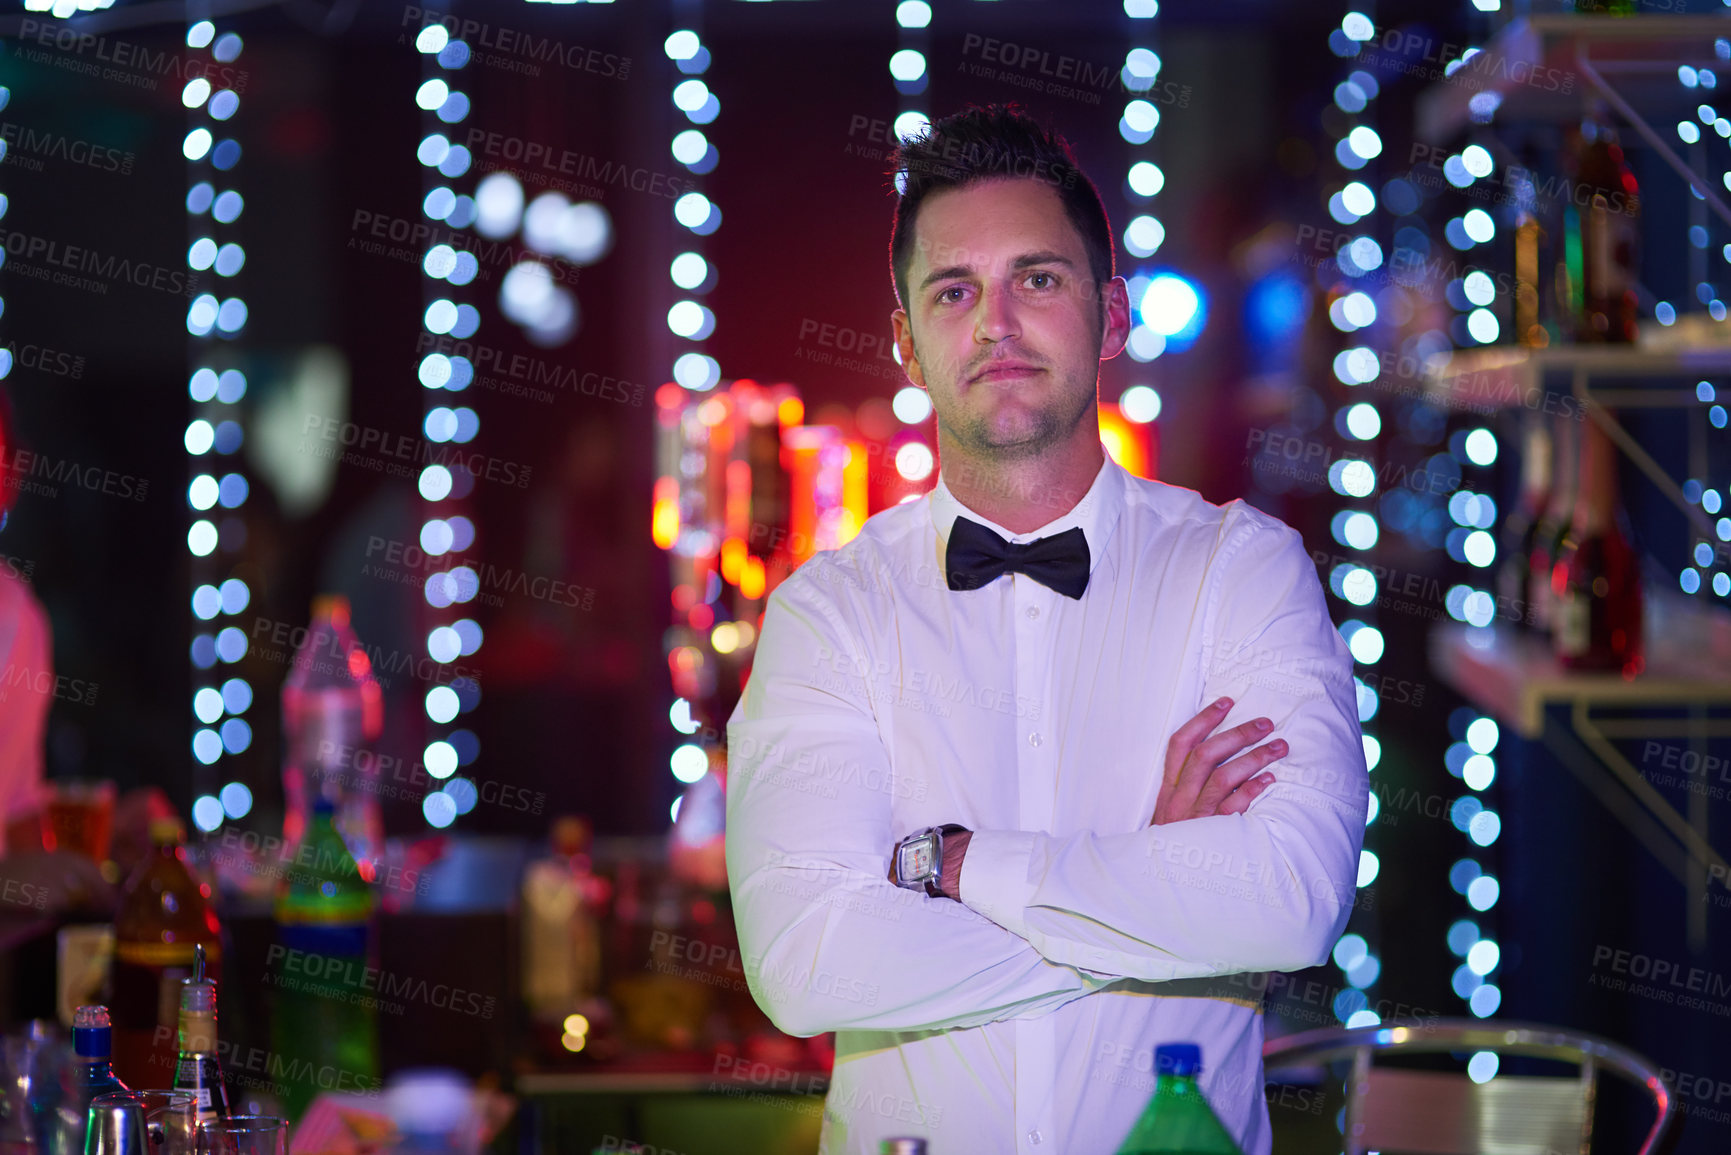 Buy stock photo Portrait of a serious looking bartender standing with his arms crossed in a nightclub